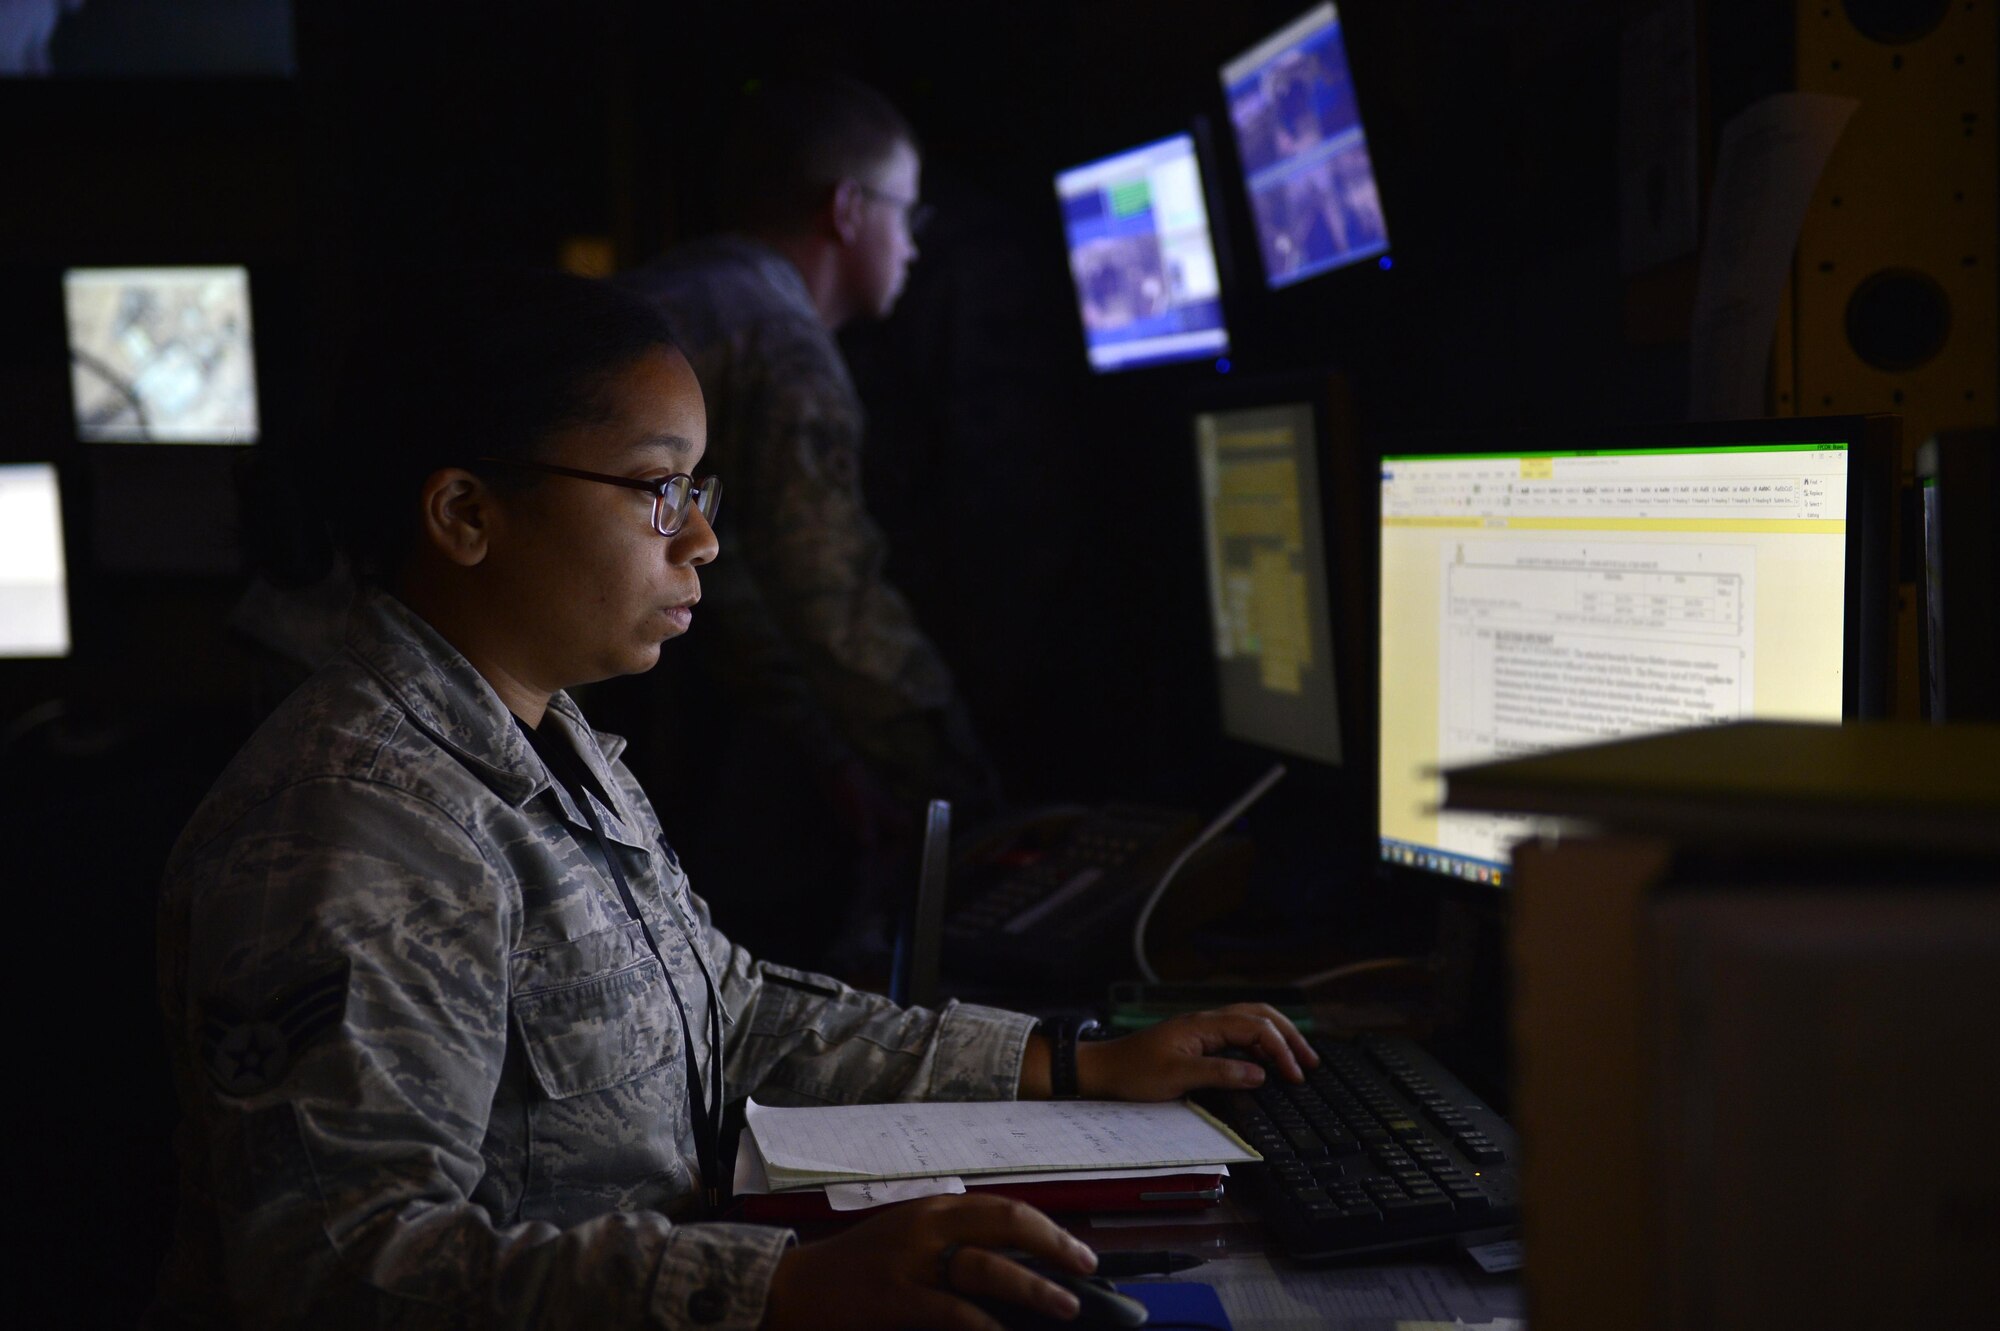 Senior Airman Stephanie, 799th Security Forces Squadron base defense operations center controller, front, processes requests while Airman 1st Class Bud, 799th SFS alarm monitor, checks perimeter cameras May 16, 2016, at Creech Air Force Base, Nevada. As part of National Police Week security forces defenders came together during a military working dog demonstration at a local high school, life of a warrior fitness challenge, and a retreat ceremony. (U.S. Air Force photo by Senior Airman Christian Clausen/Released)